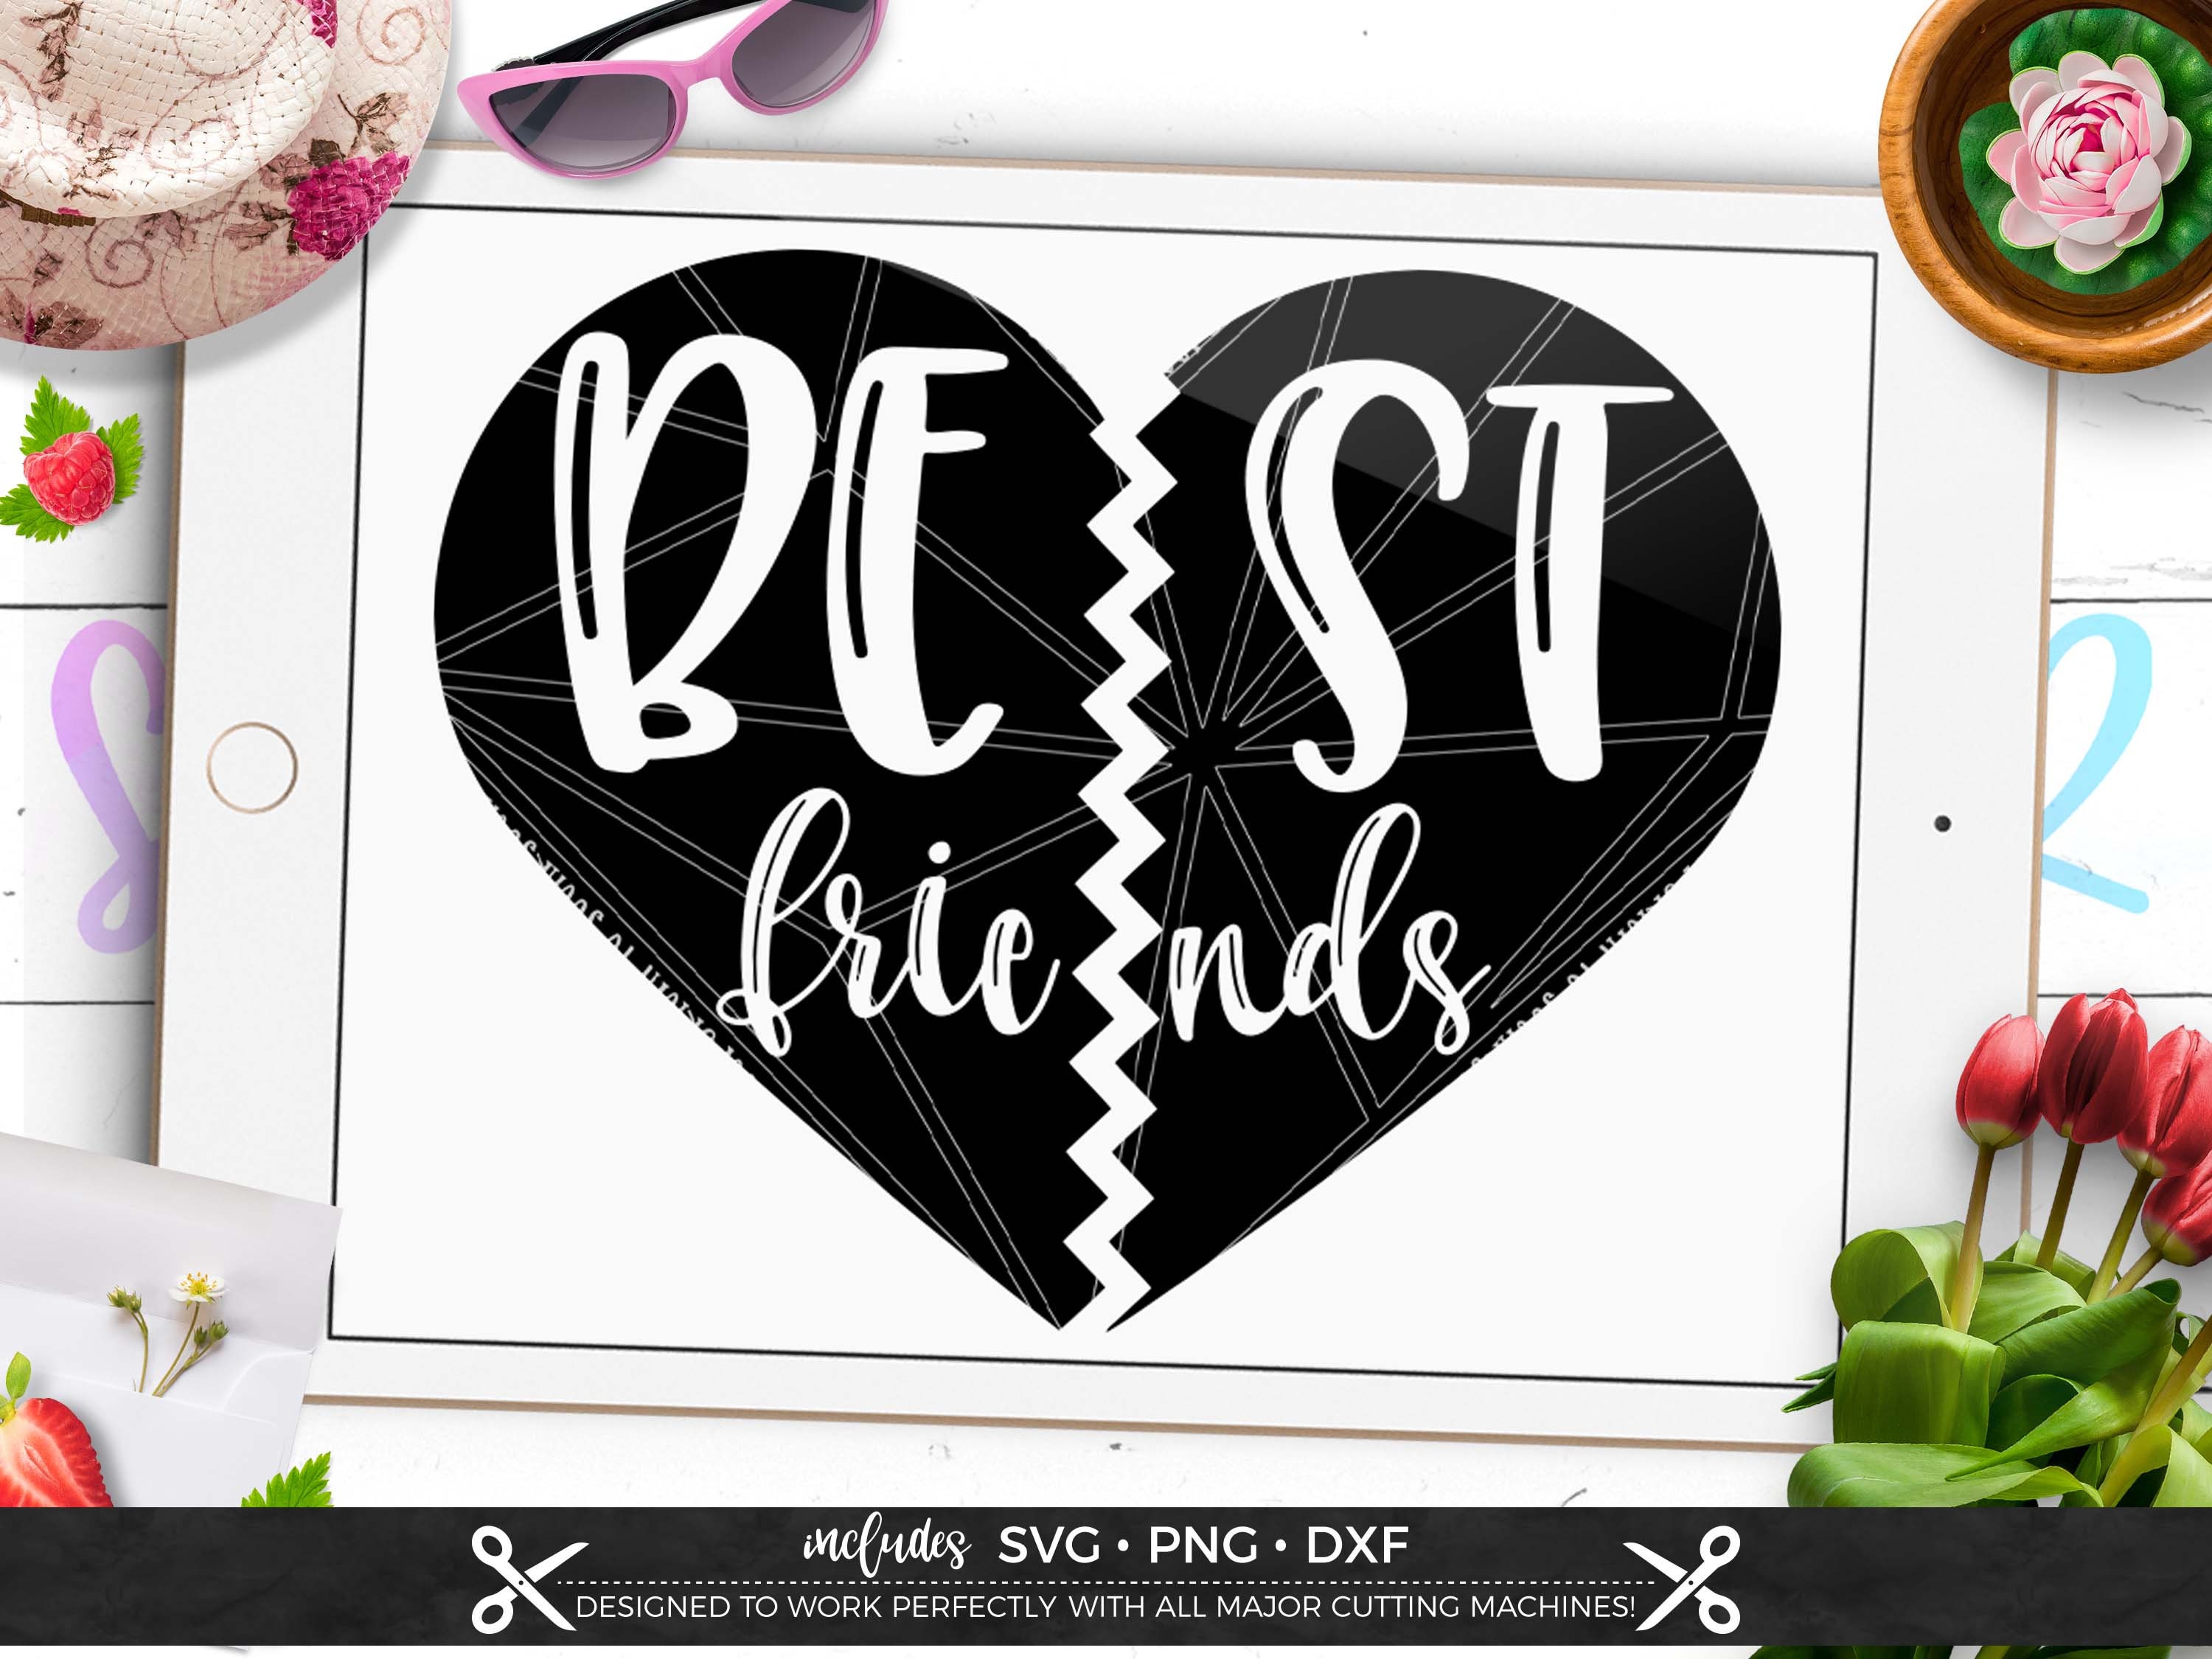 ETC Best Friends Heart SVG DXF Cut File for Shirts Cups Decals.